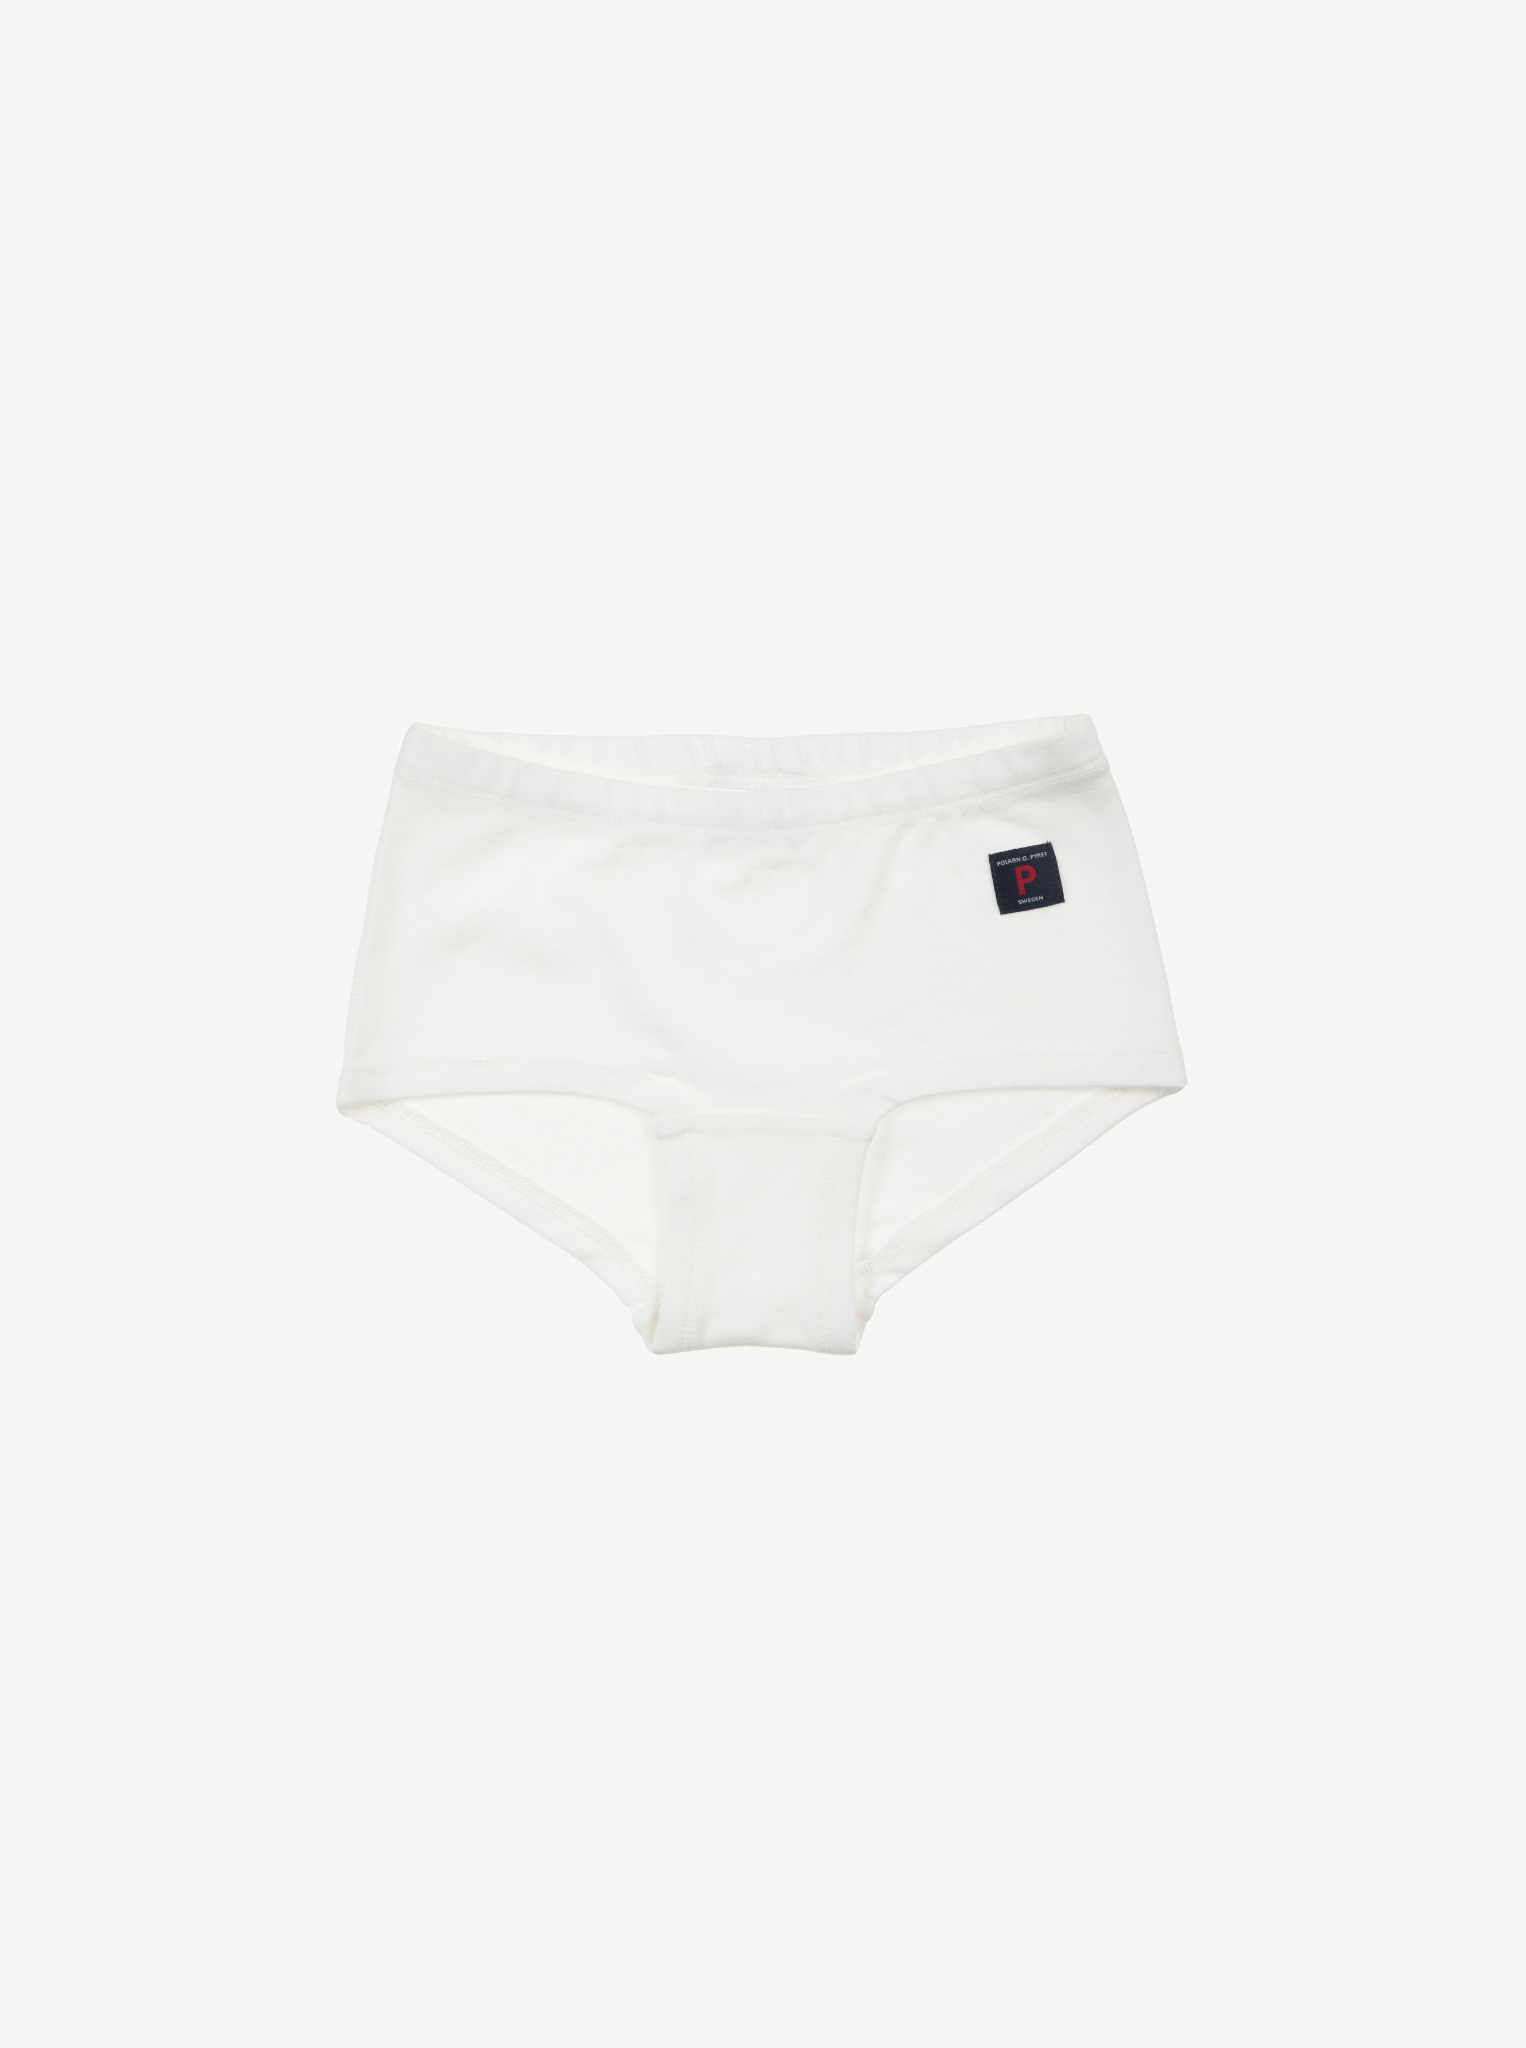 White Girls Briefs for babys toddlers and kids